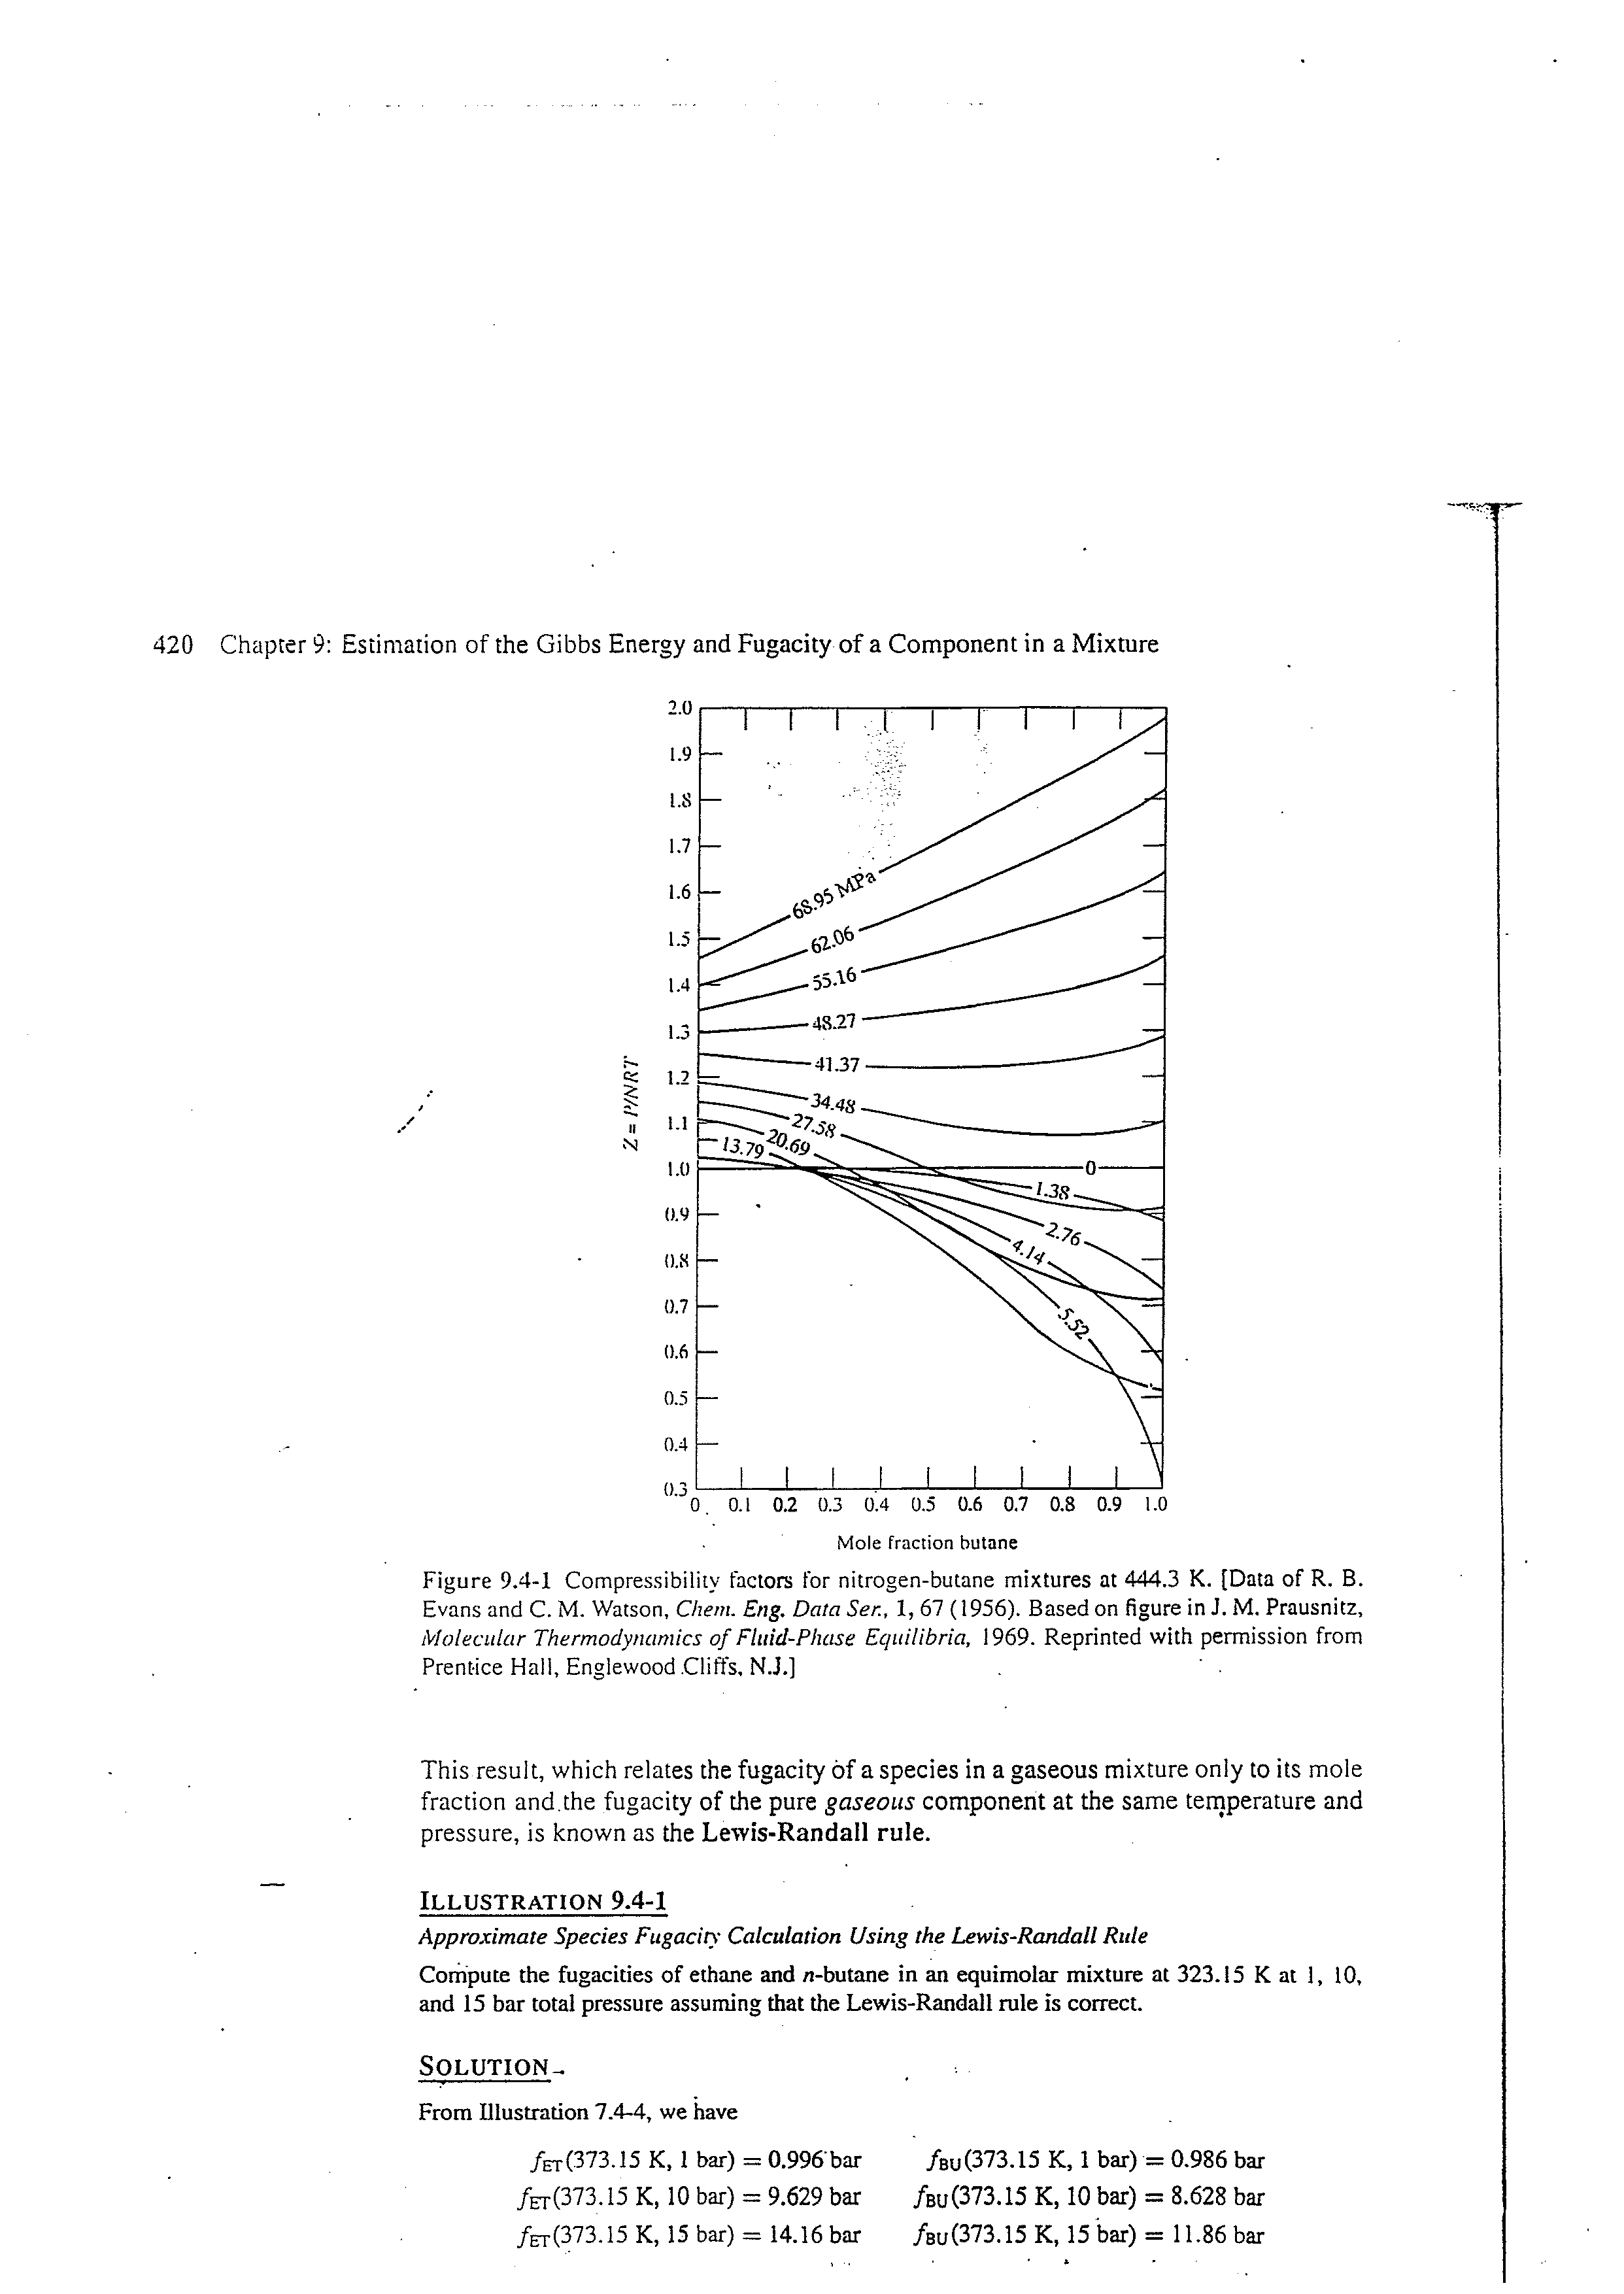 Figure 9.4-1 Compres.sibility factors for nitrogen-butane mixtures at 444.3 K. [Data of R. B. Evans and C. M. Watson, Chem. Eng. Data Sen, 1, 67 (1956). Based on figure in J. M. Prausnitz, Molecular Thermodynamics of Fluid-Phase Equilibria, 1969. Reprinted with permission from Prentice Hall, Englewood. Cliffs, N.J.]...